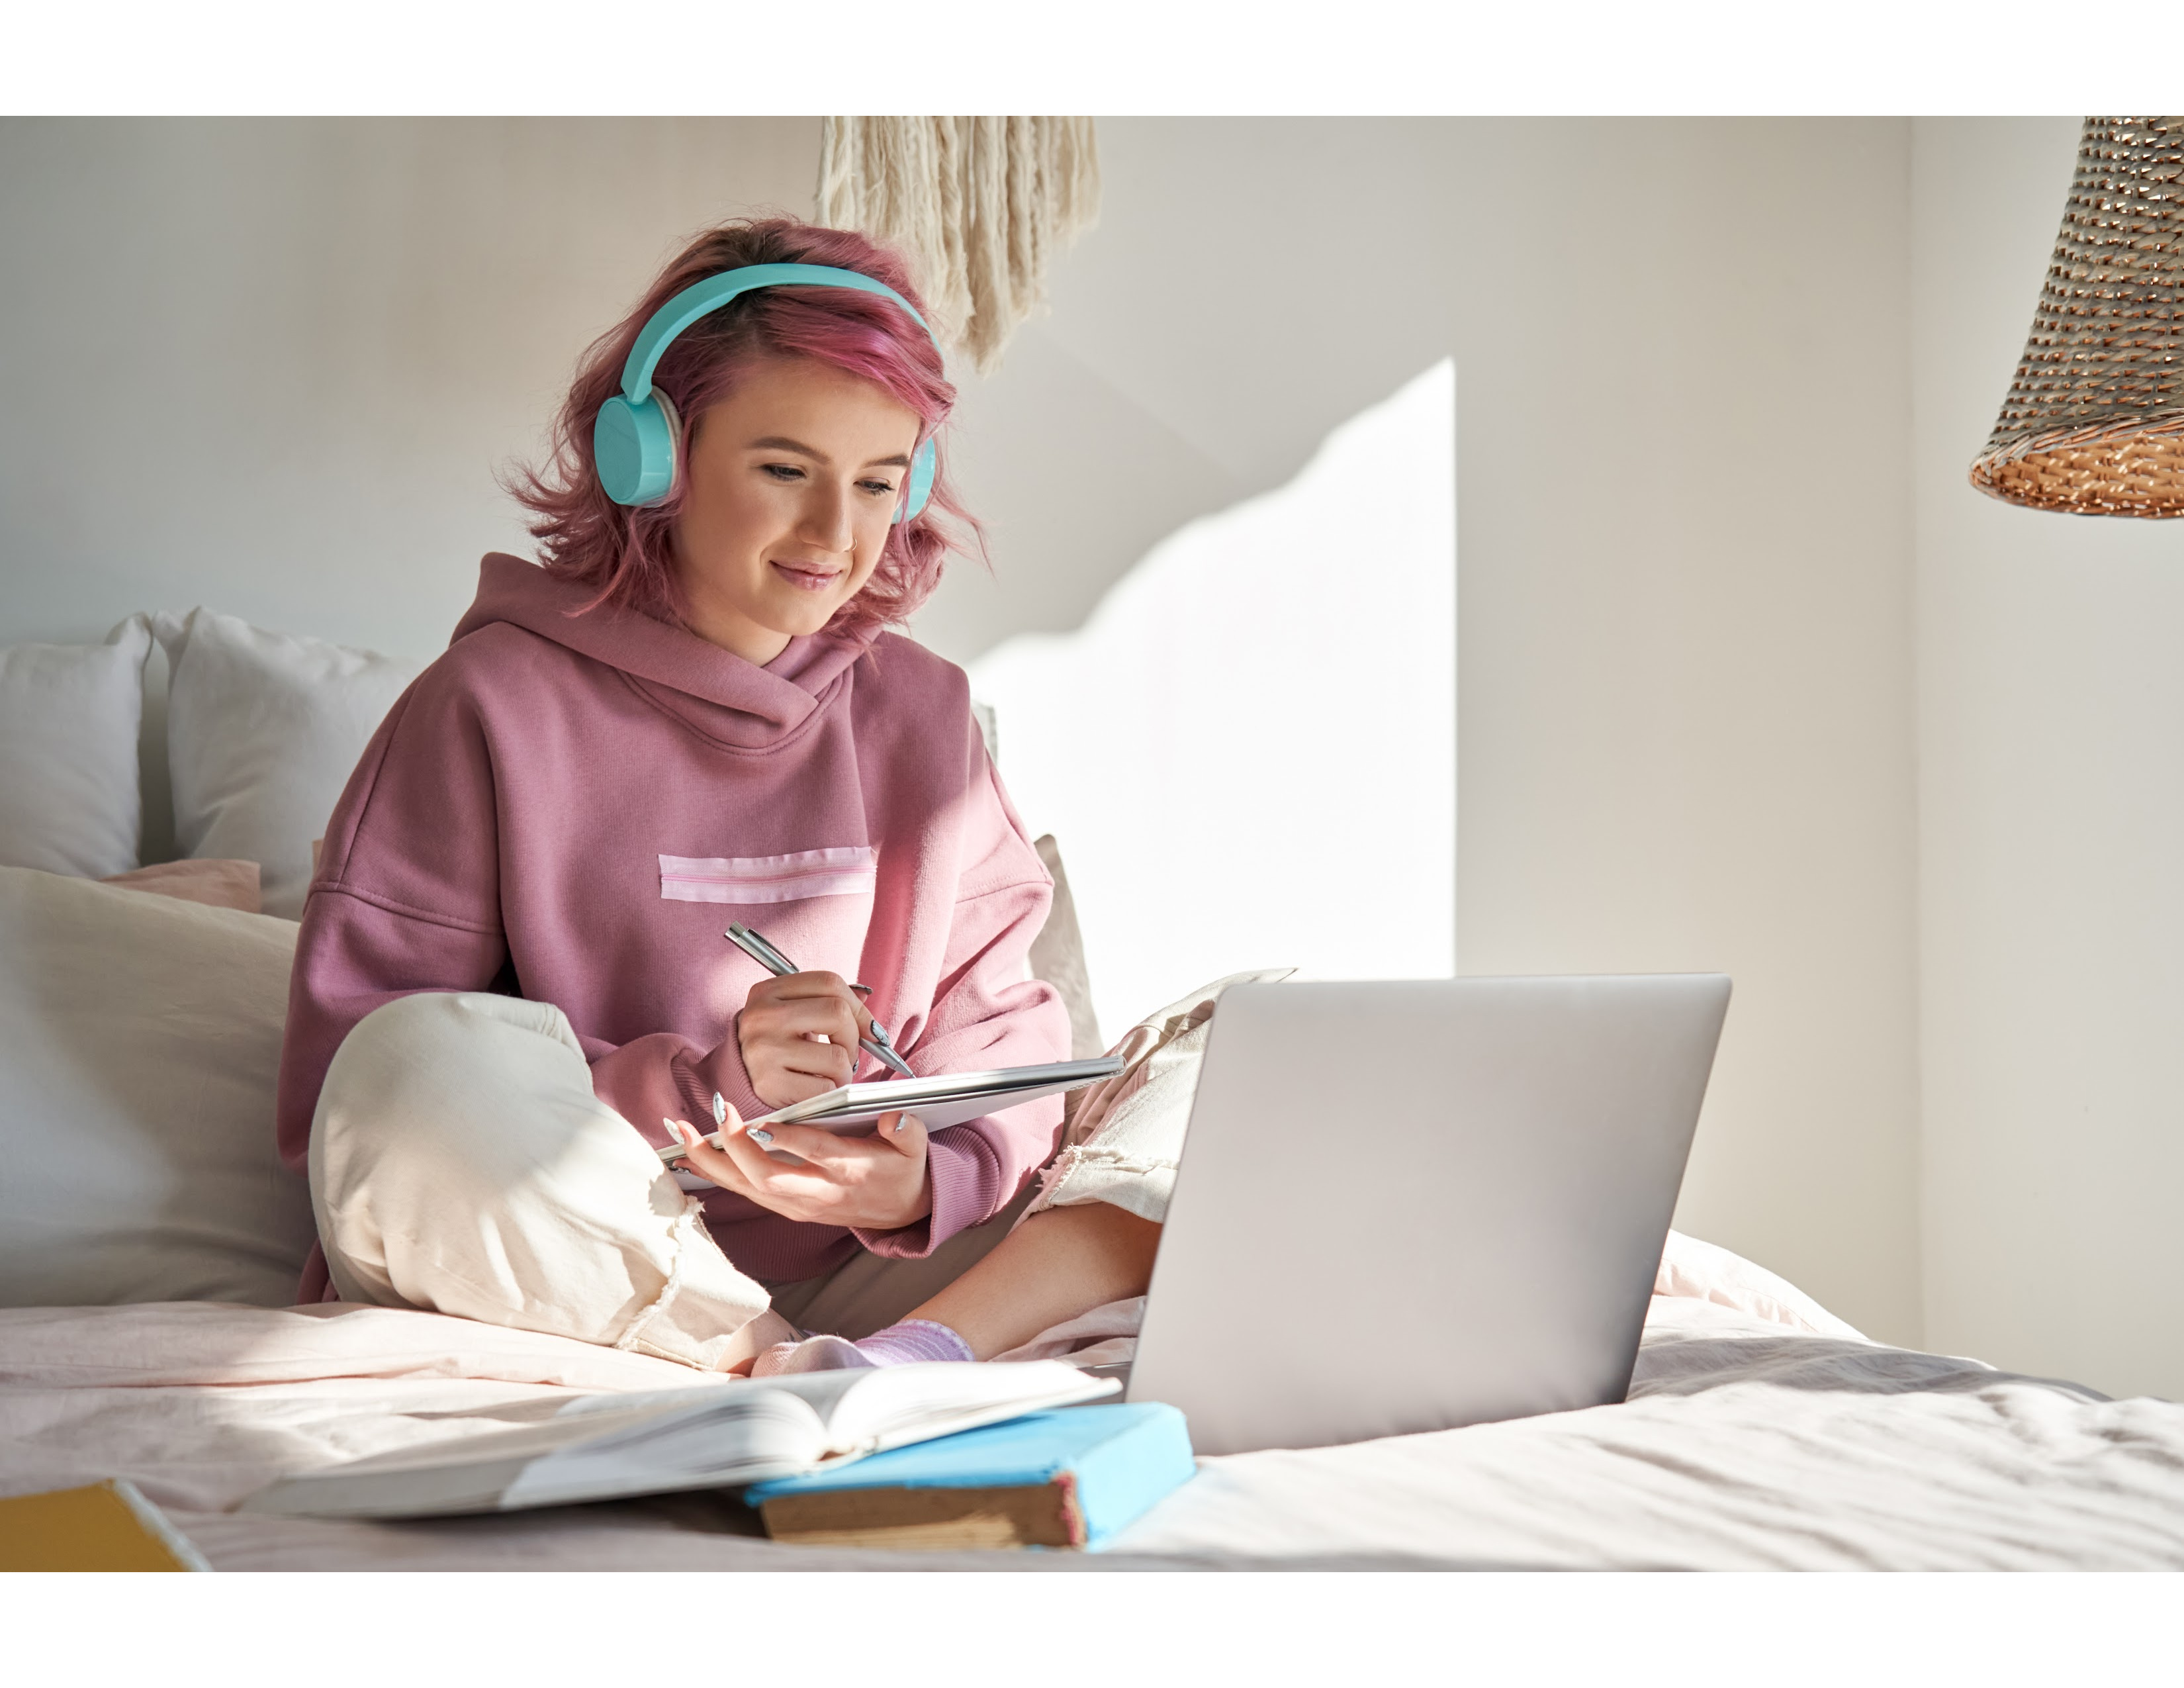 female student sitting on a bed with a laptop, notepad, and headphones